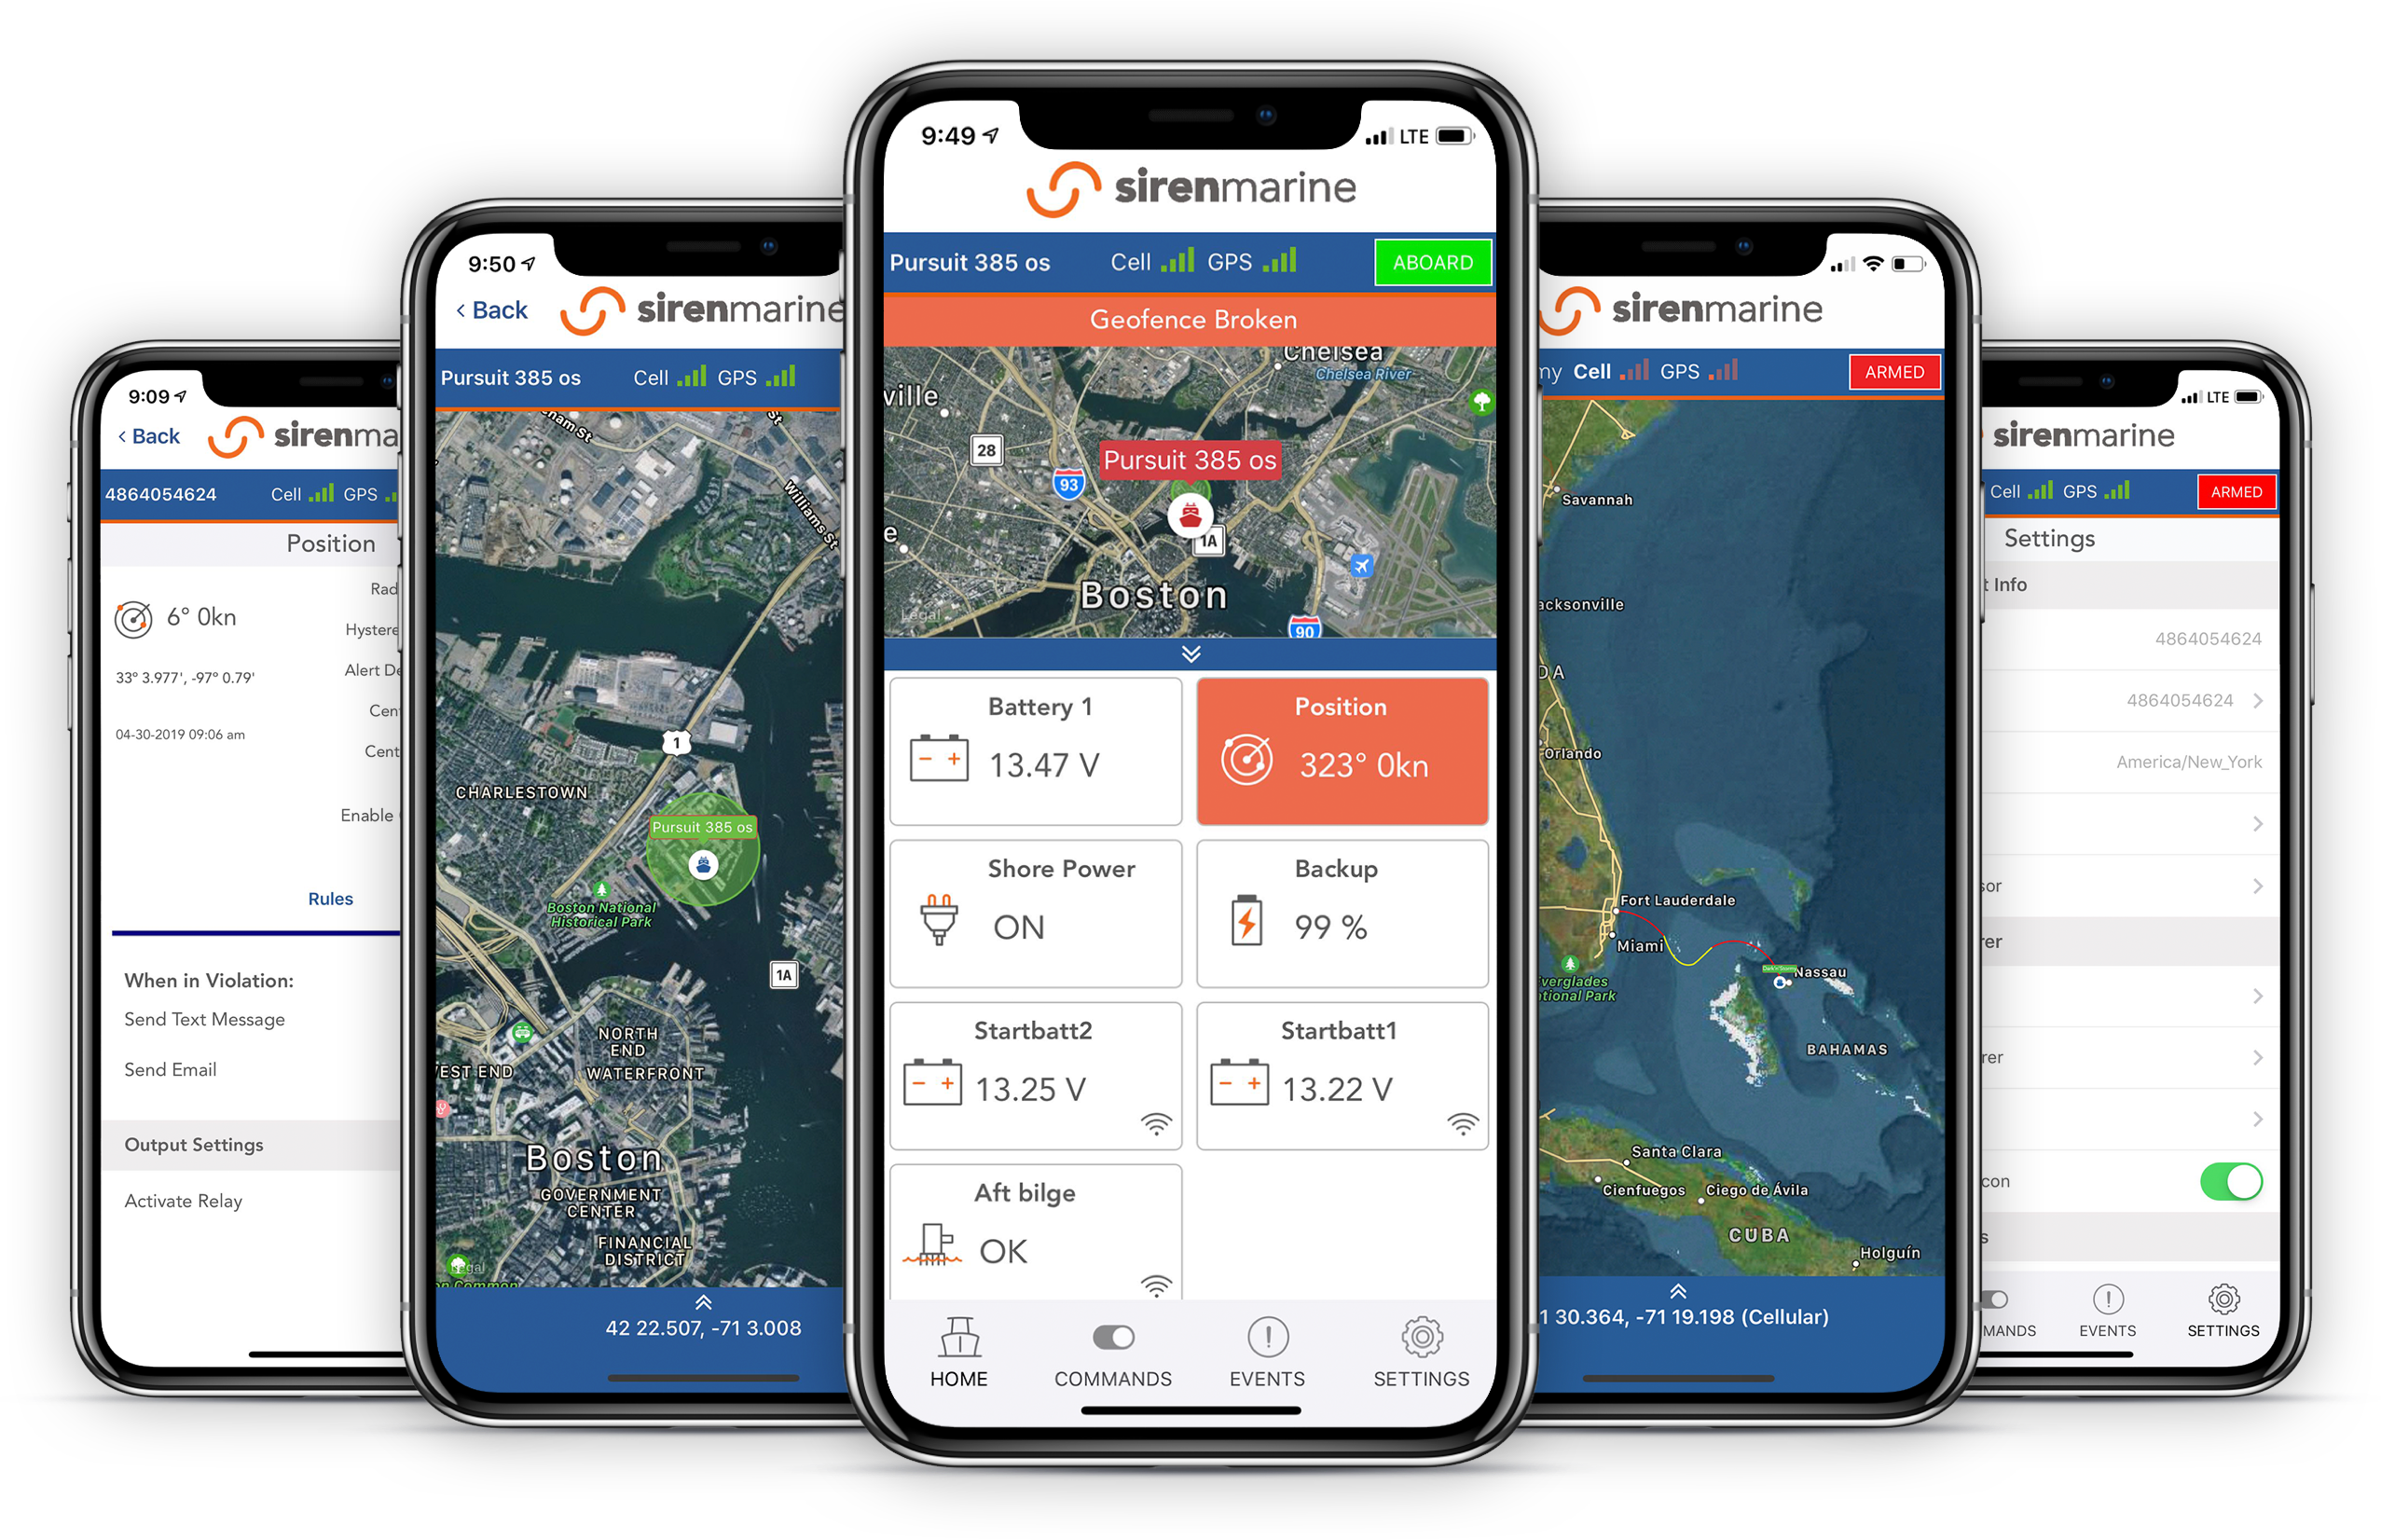 Siren Marine Large Callout of their mobile application